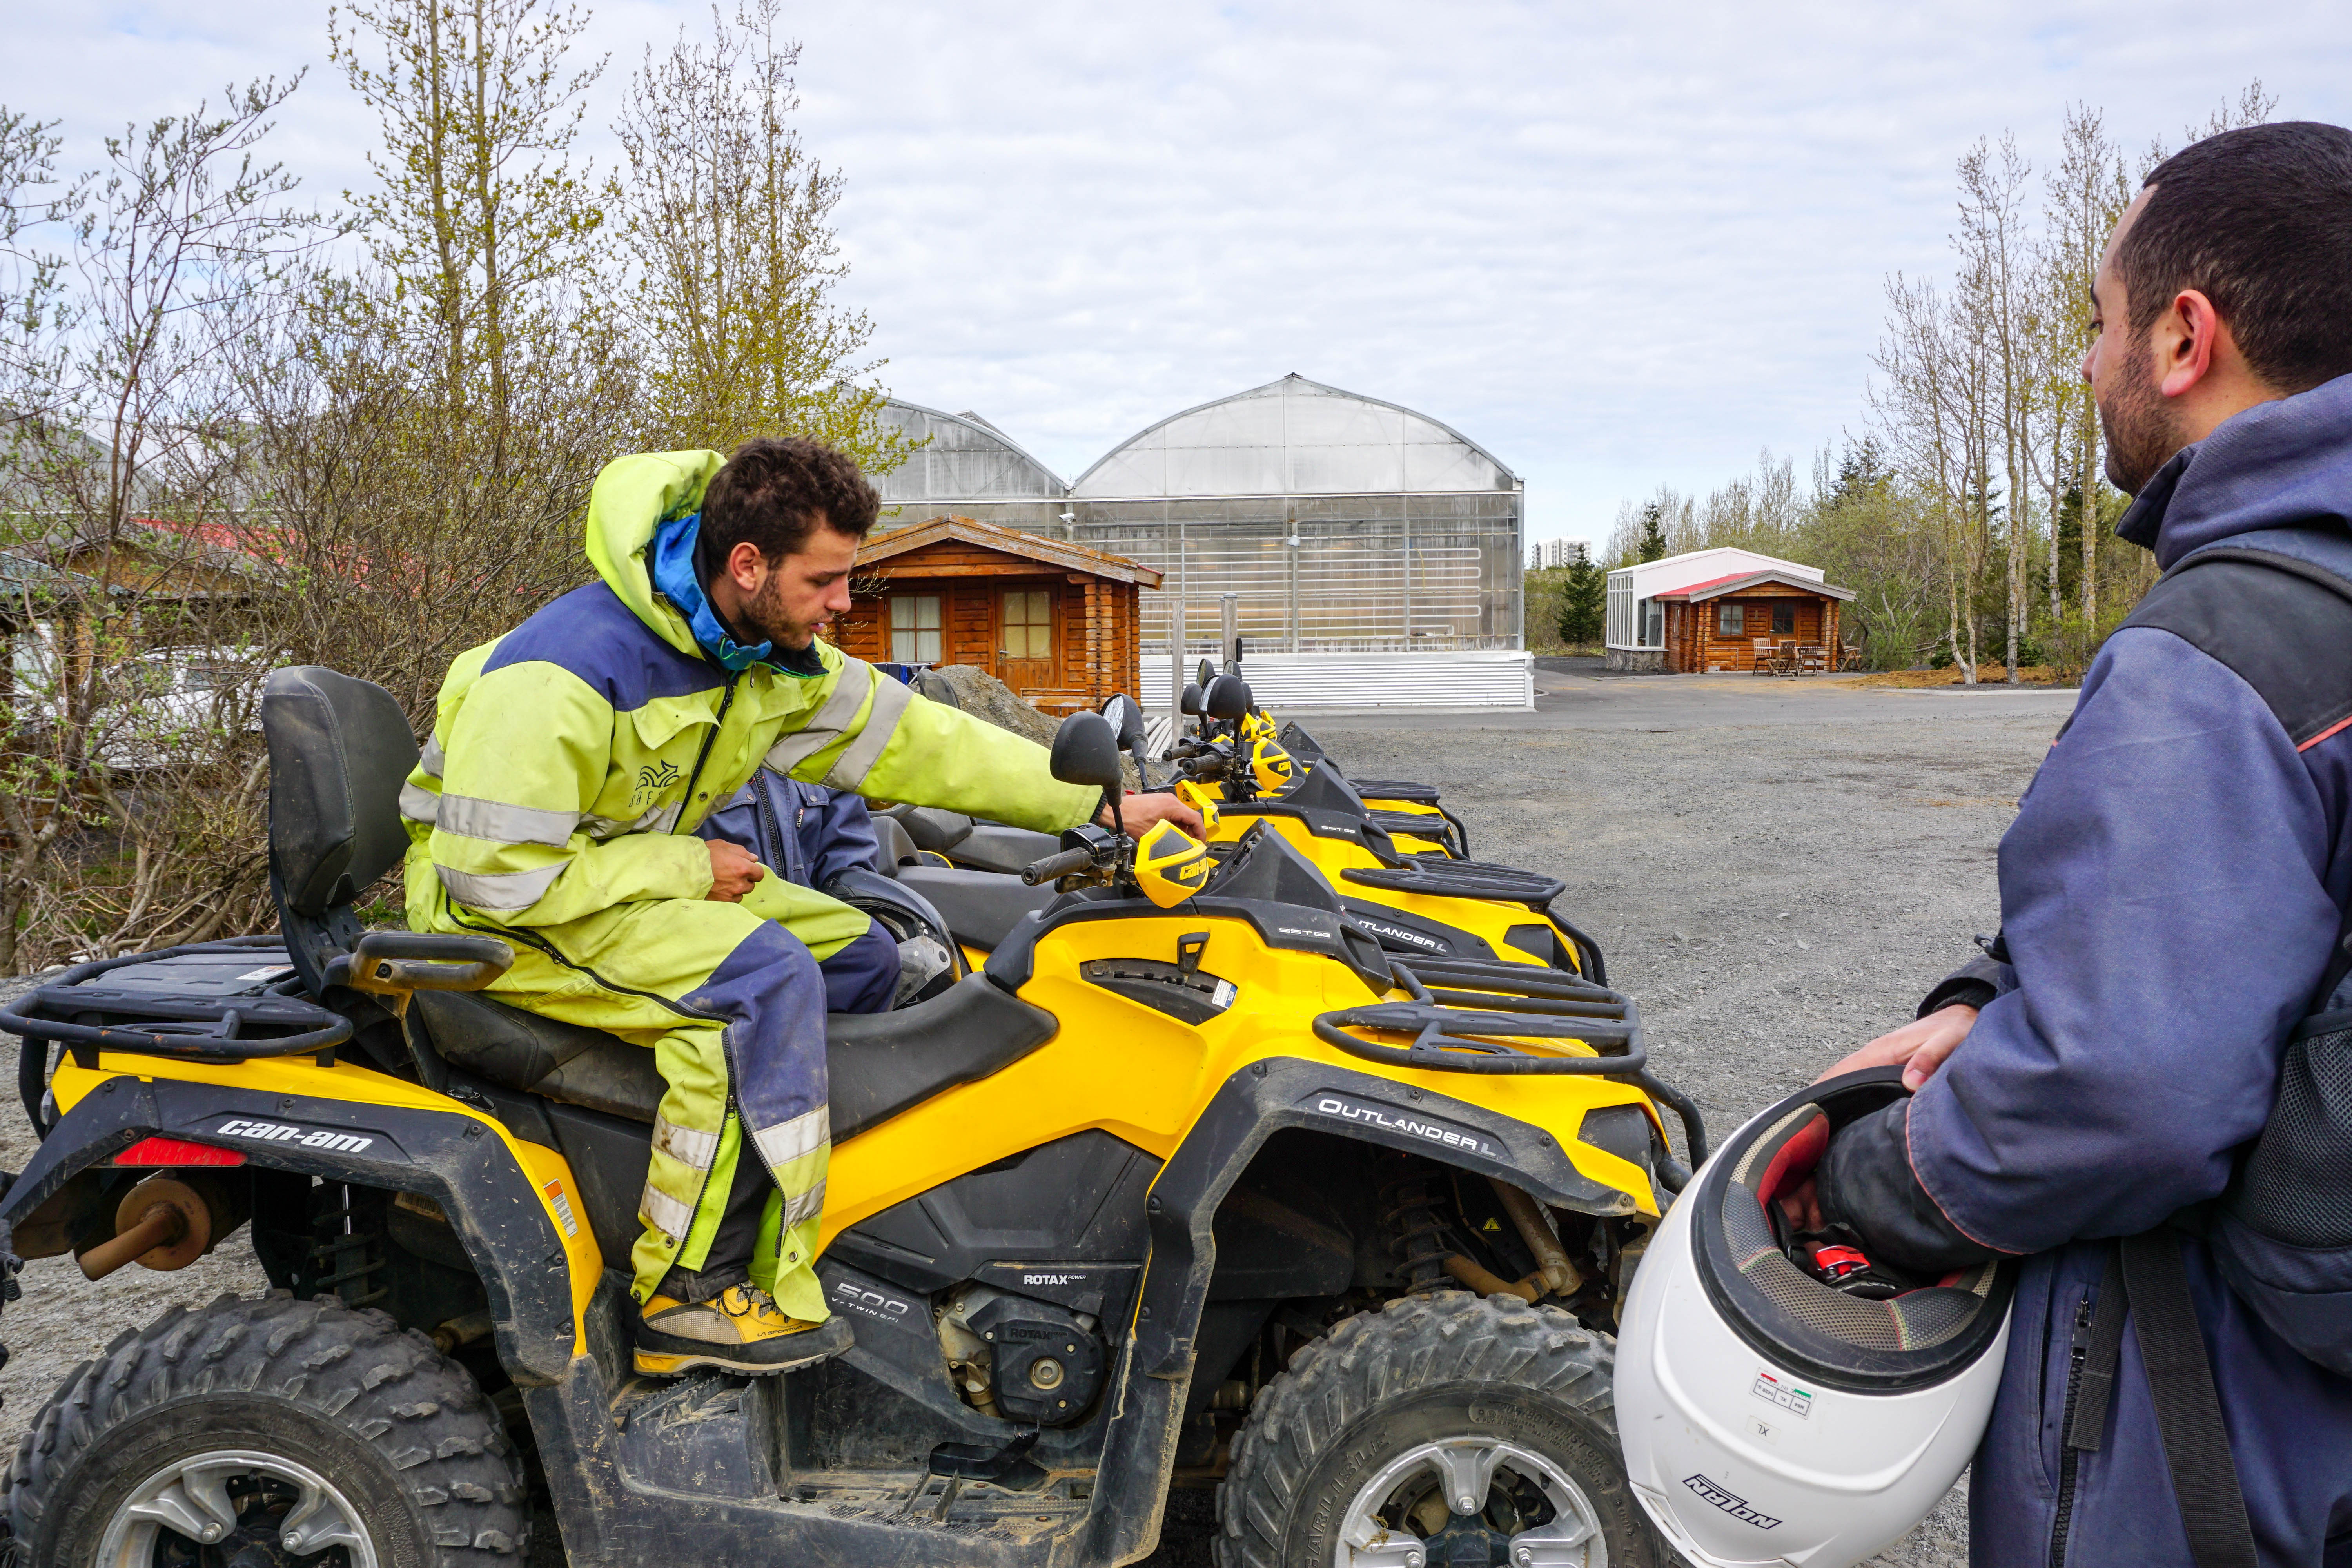 Looking for some off-road adventure in Iceland? There's no better way to get into nature and explore the wild Icelandic wilderness than with an ATV tour with Safari Quads! | Life With a View